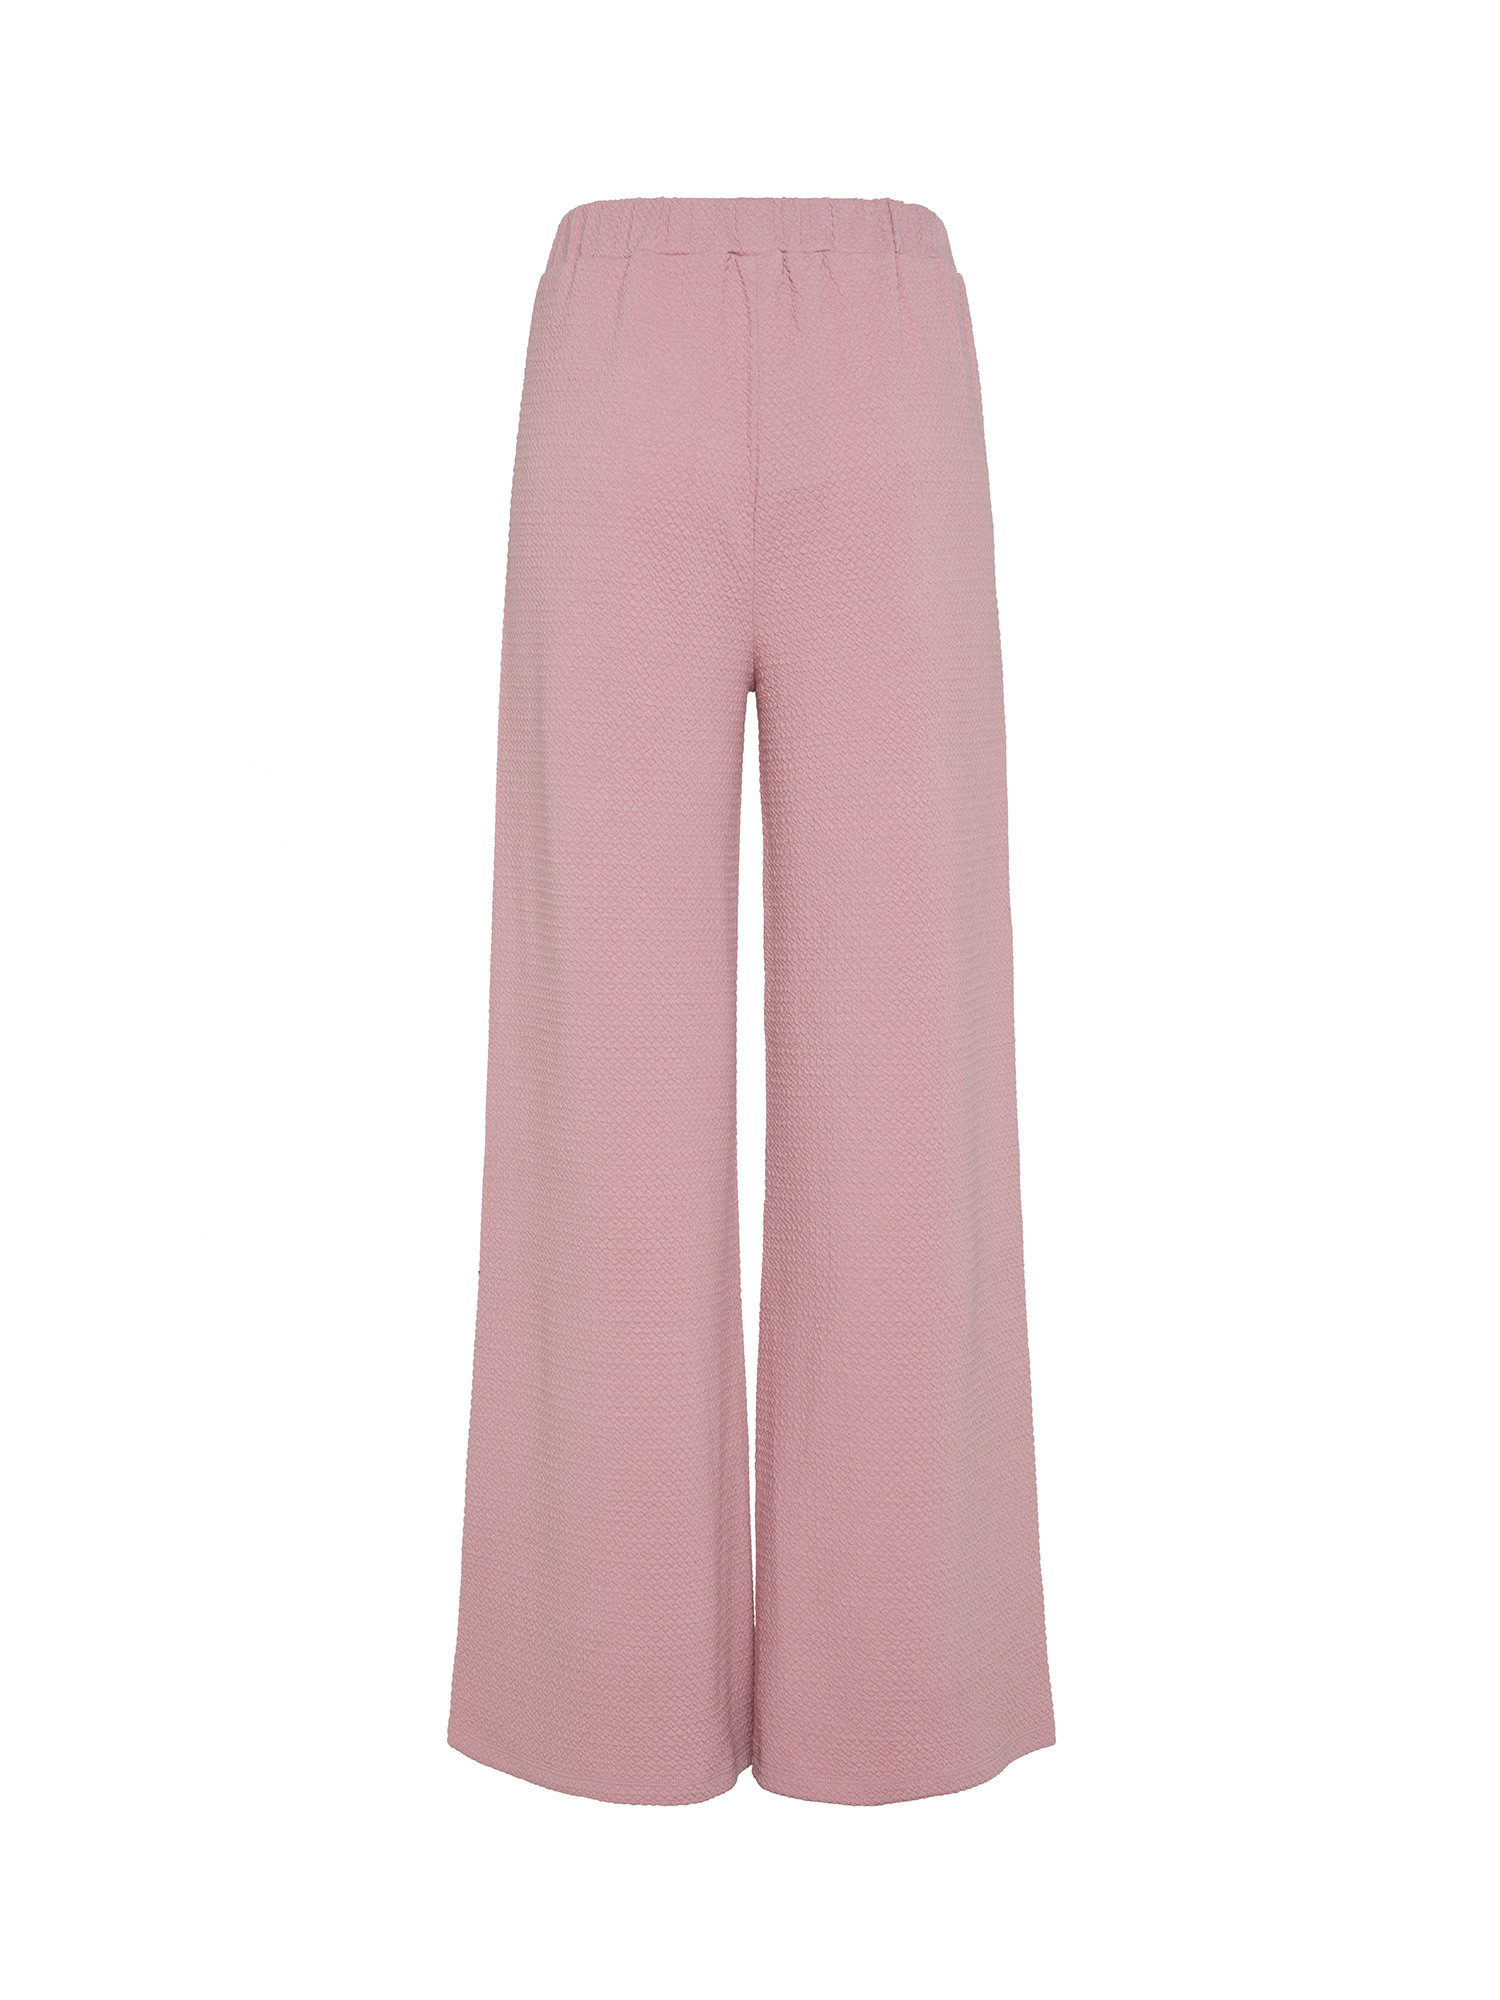 Koan - Pants in soft textured jersey, Pink, large image number 1